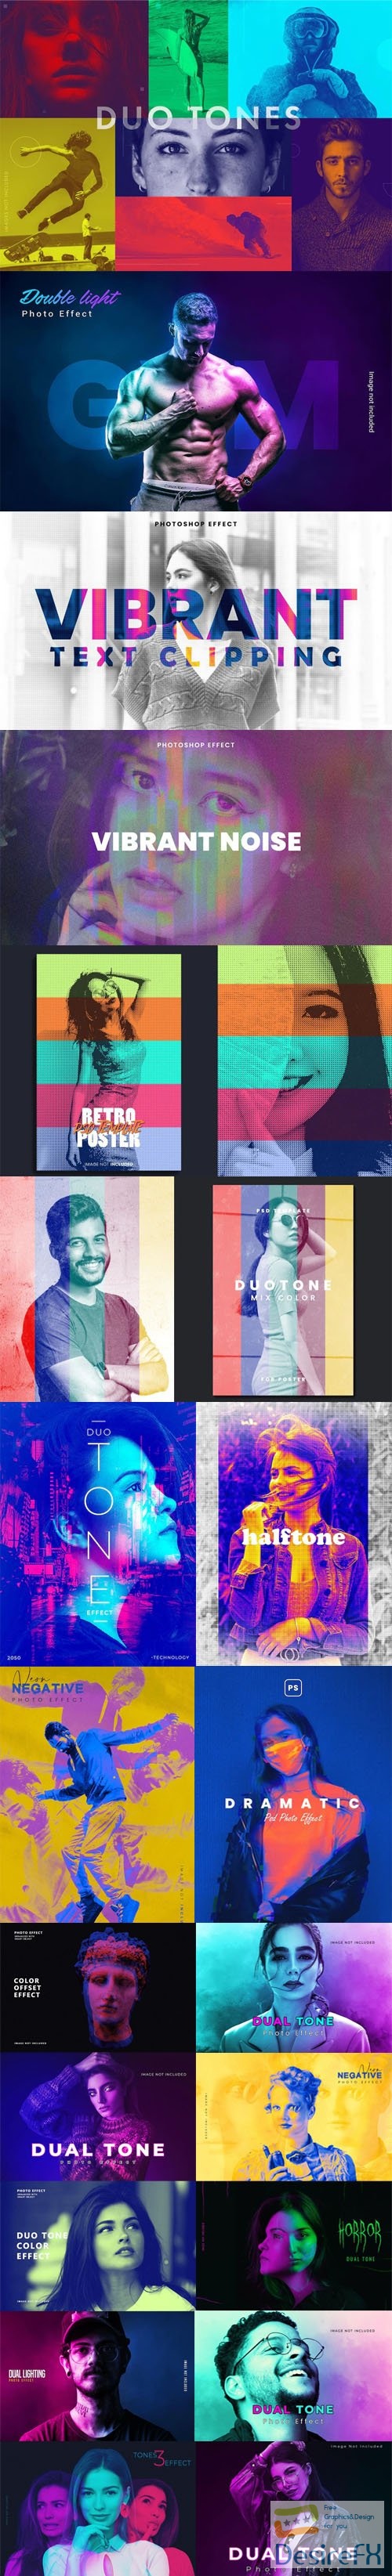 20 Awesome Vibrant Photo Effects PSD Templates